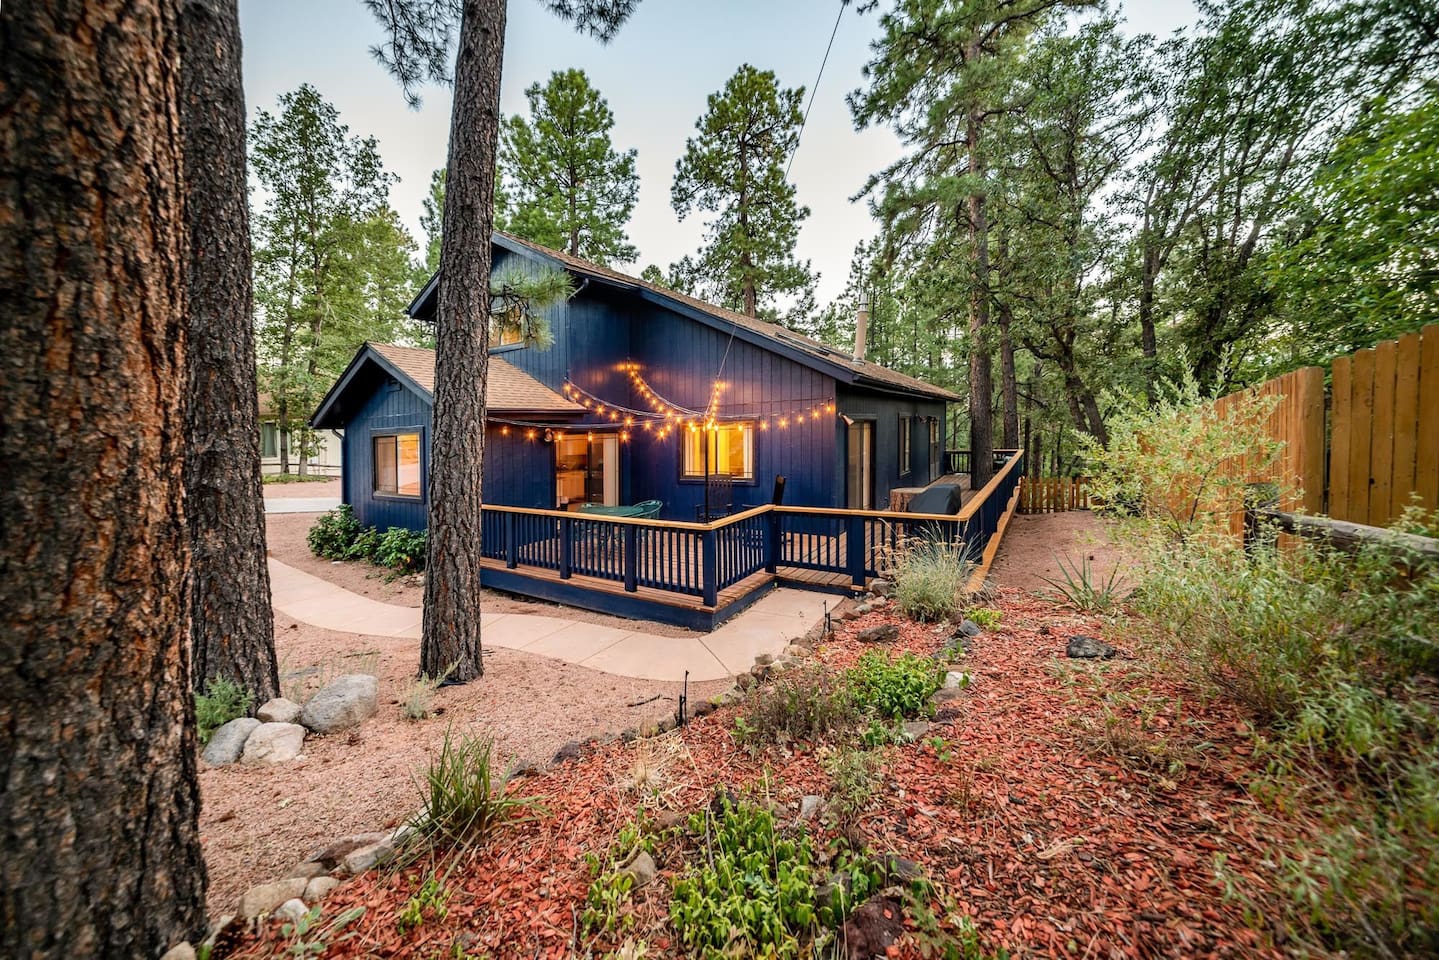 The Midnight House is one of the 15 best Airbnbs in Flagstaff